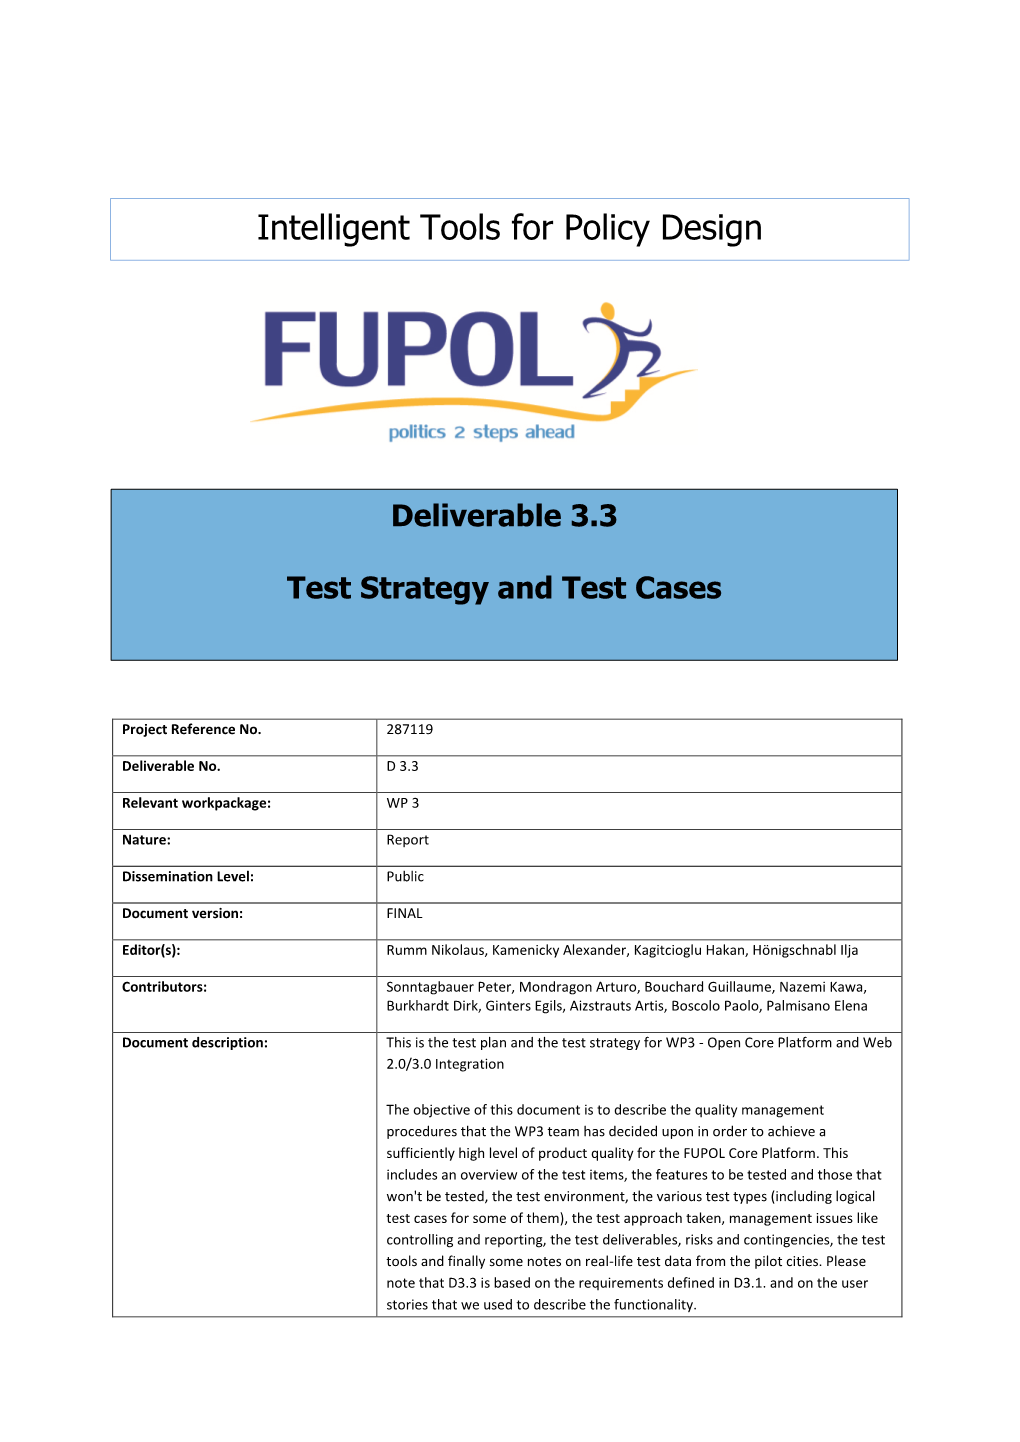 Test Strategy and Test Cases